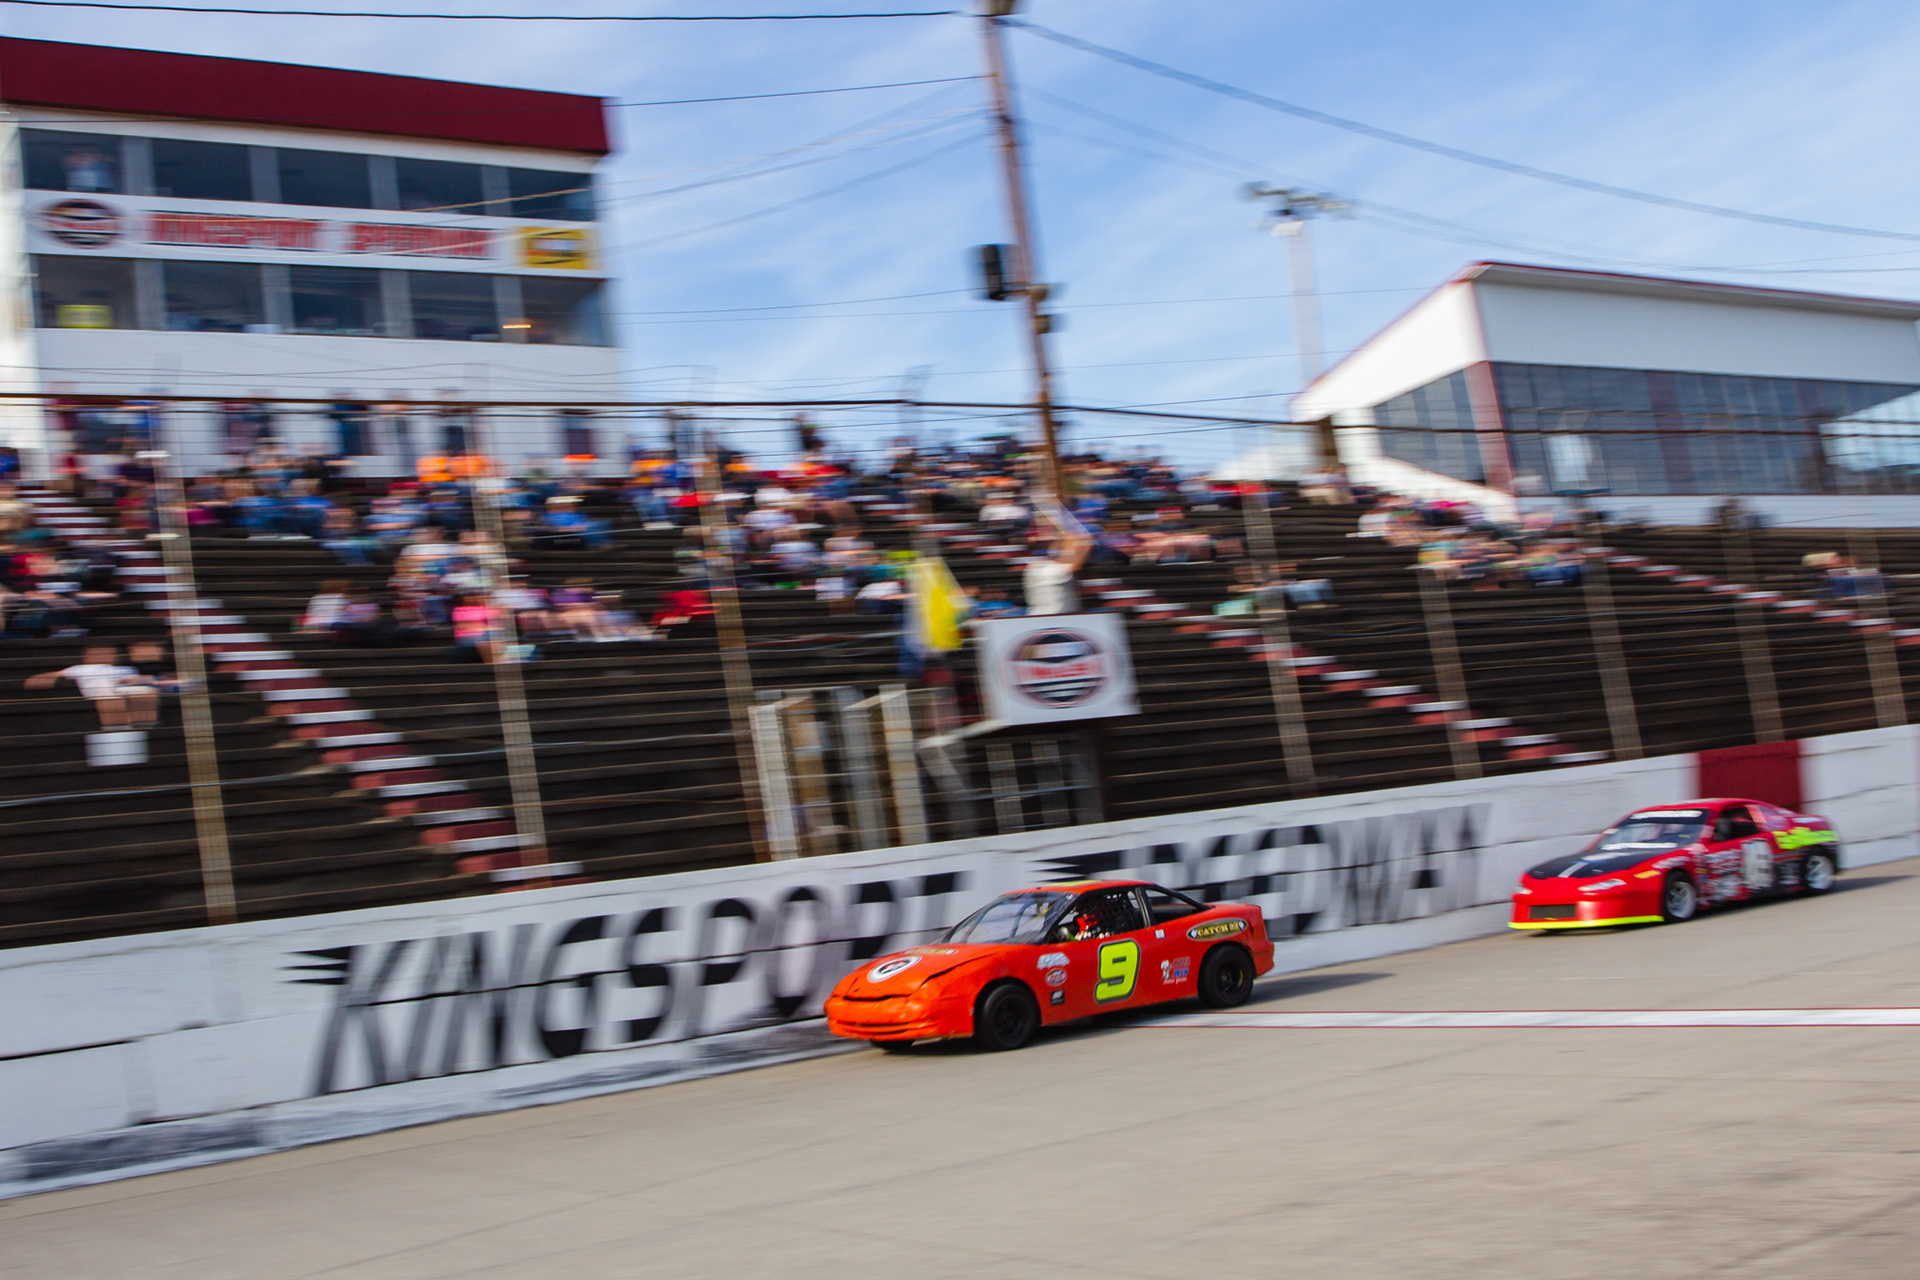 Kingsport Speedway 2019 Opening Day.